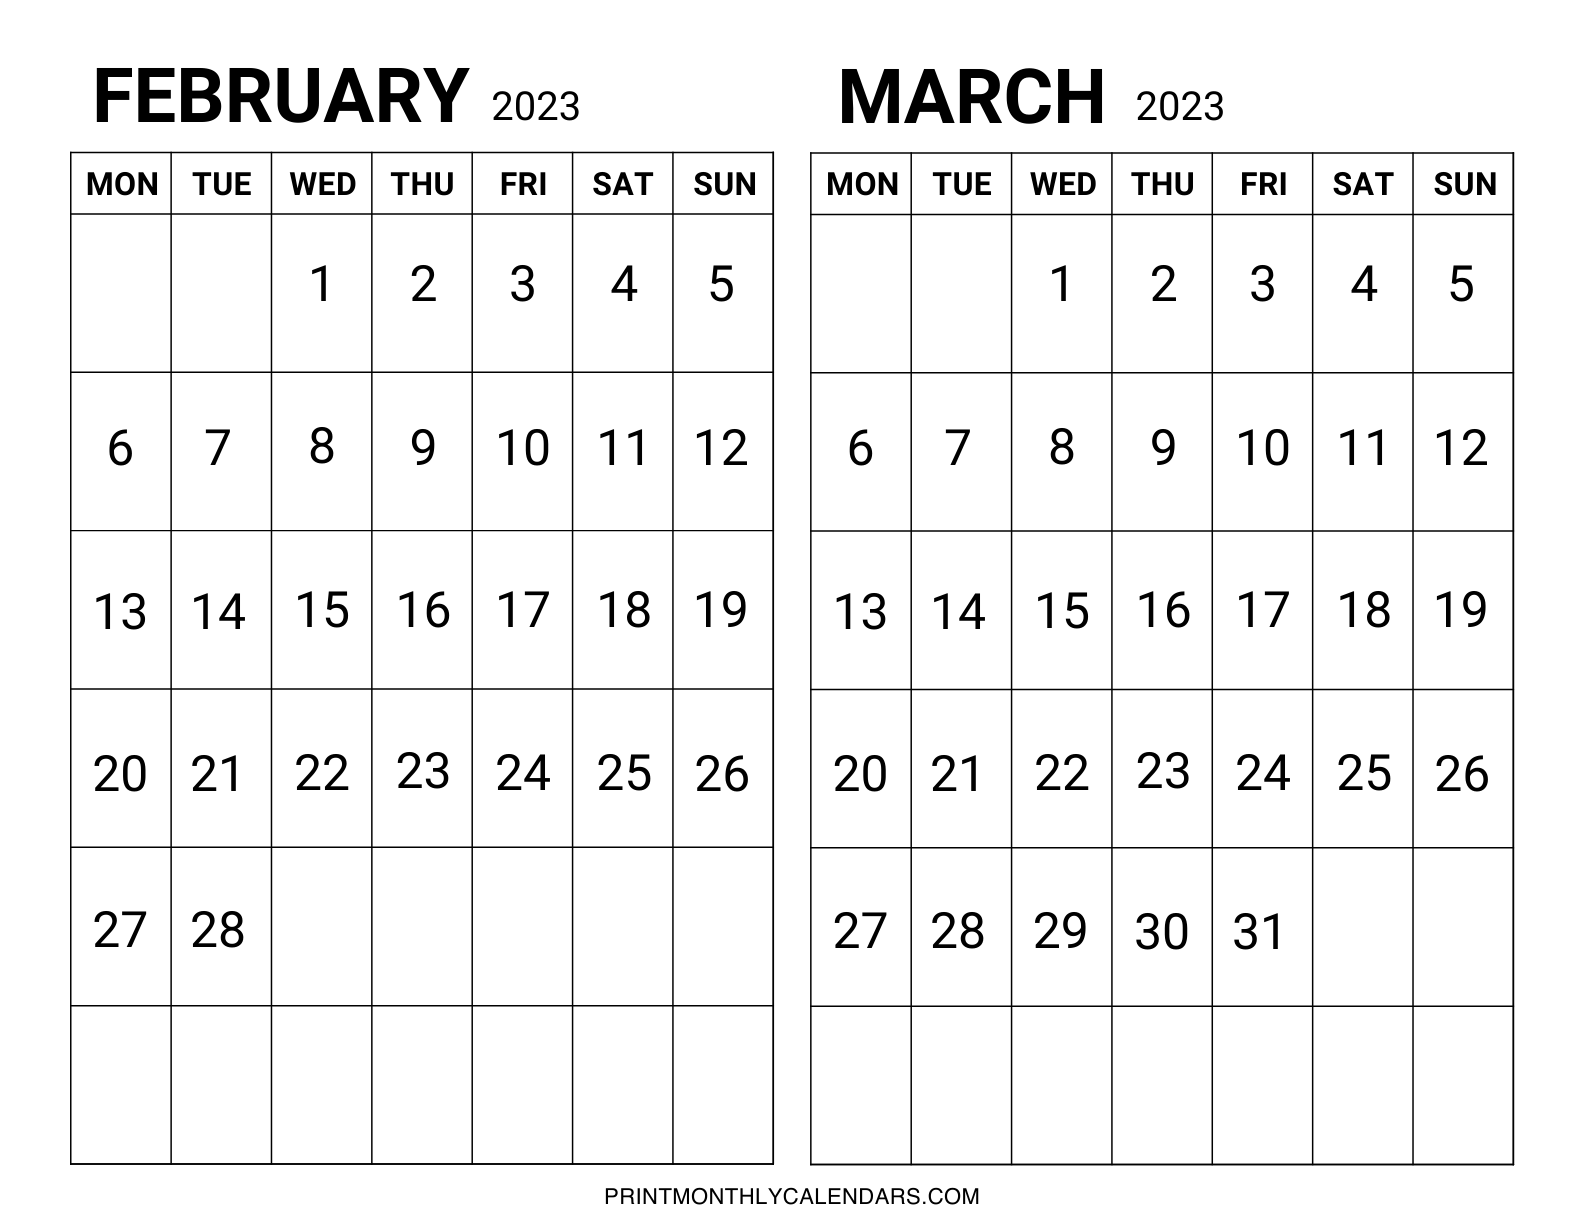 Monday Start February March 2023 Calendar template has two month grids arranged in landscape layout. Monthly dates are written in bold fonts.